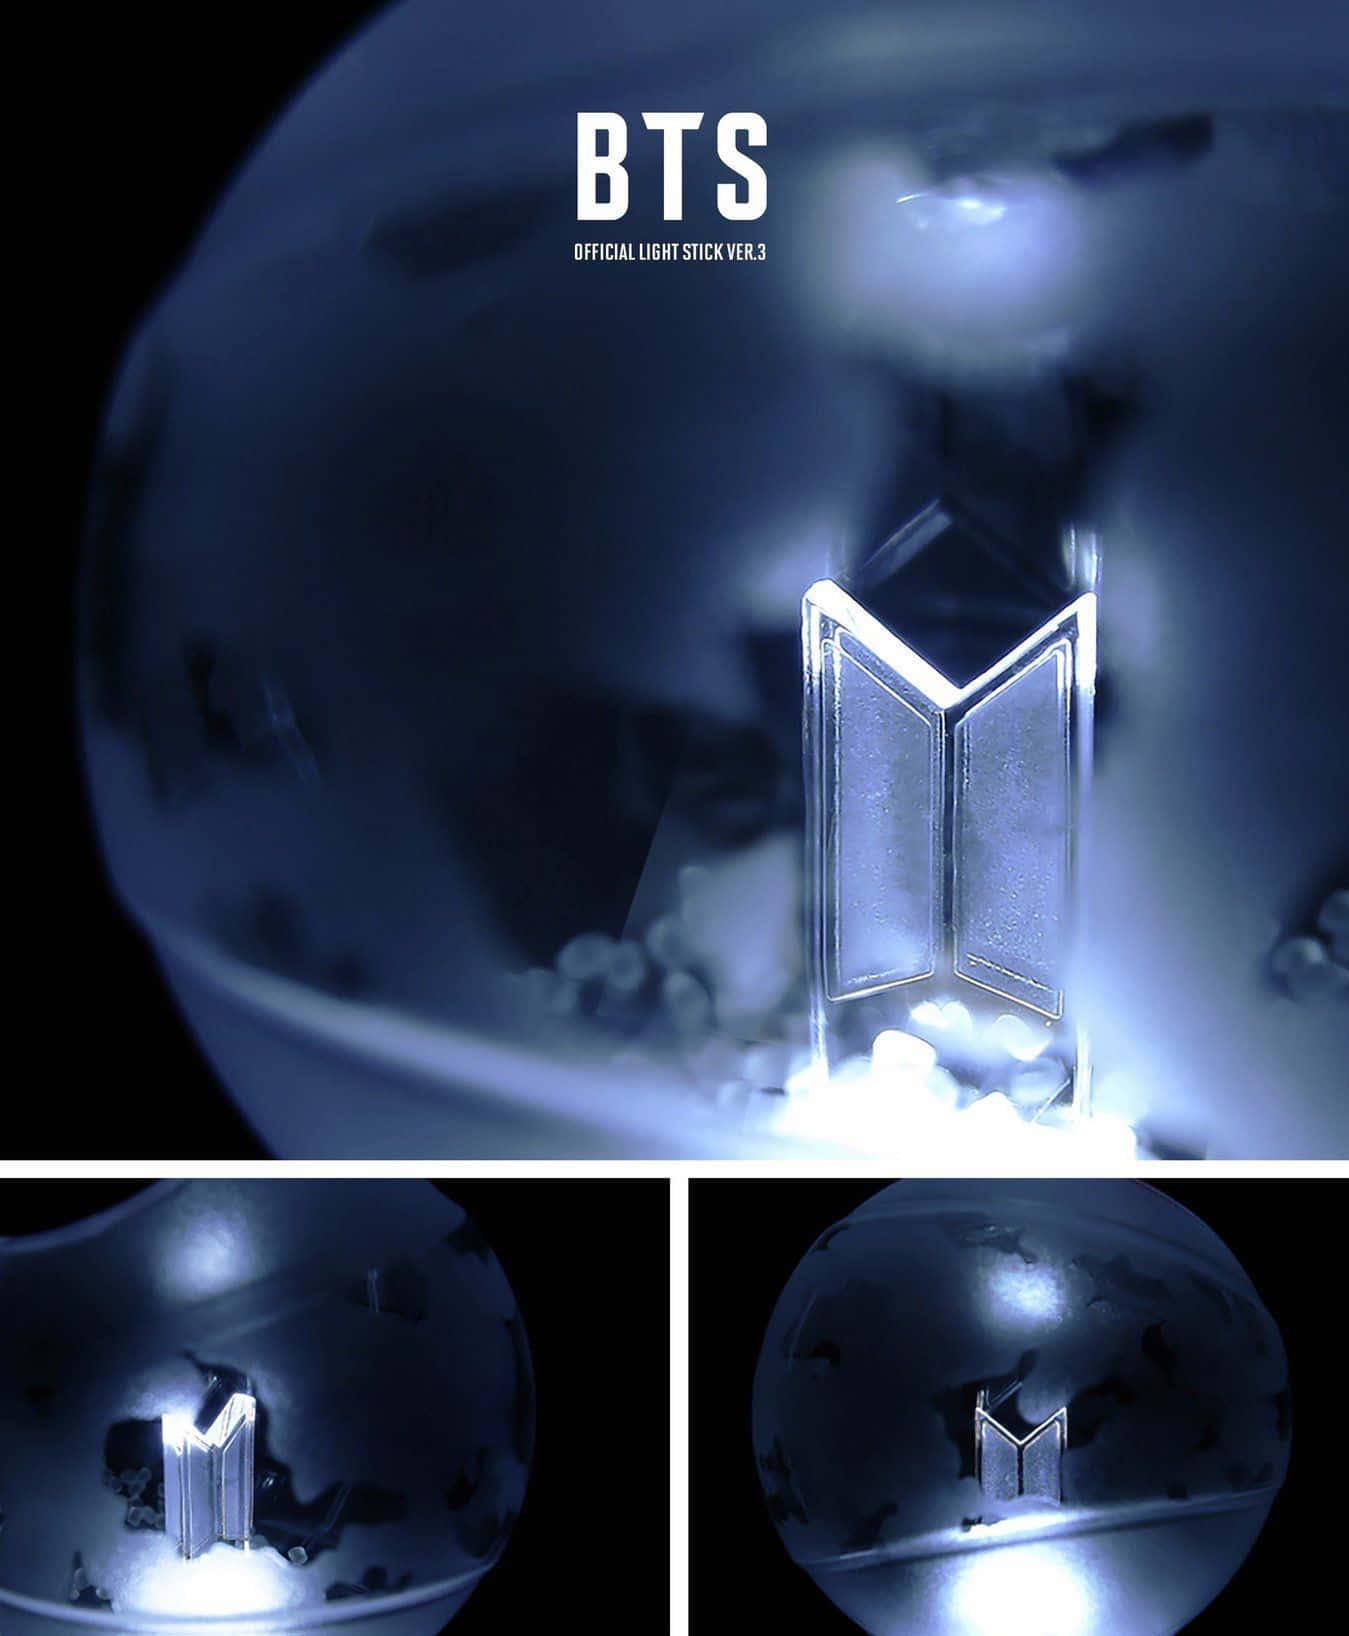 BTS ARMY Bomb waving in action at a sold-out concert Wallpaper